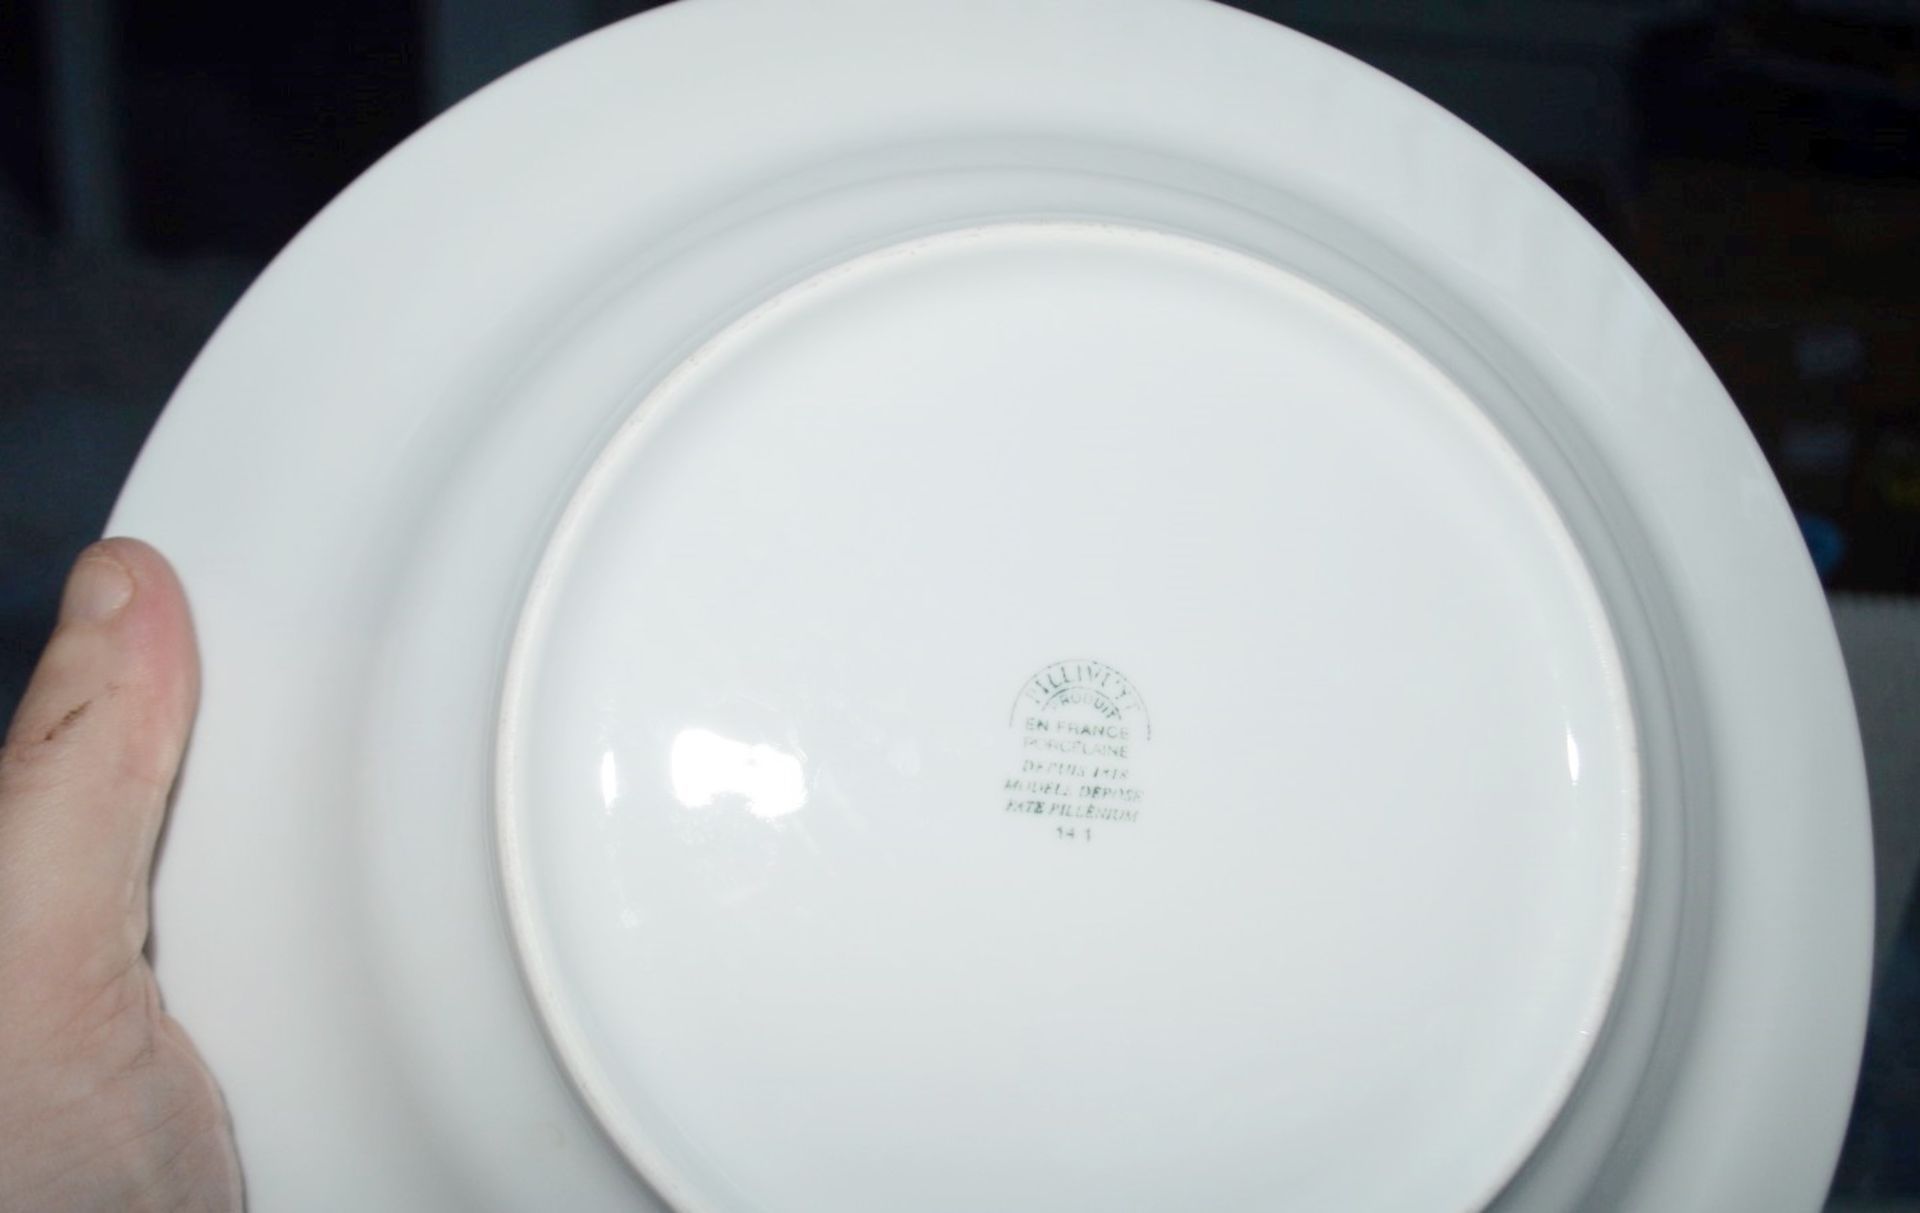 12 x PILLIVUYT 27cm Porcelain Pasta / Soup Plates In White Featuring 'Famous Branding' In Gold - Image 4 of 5